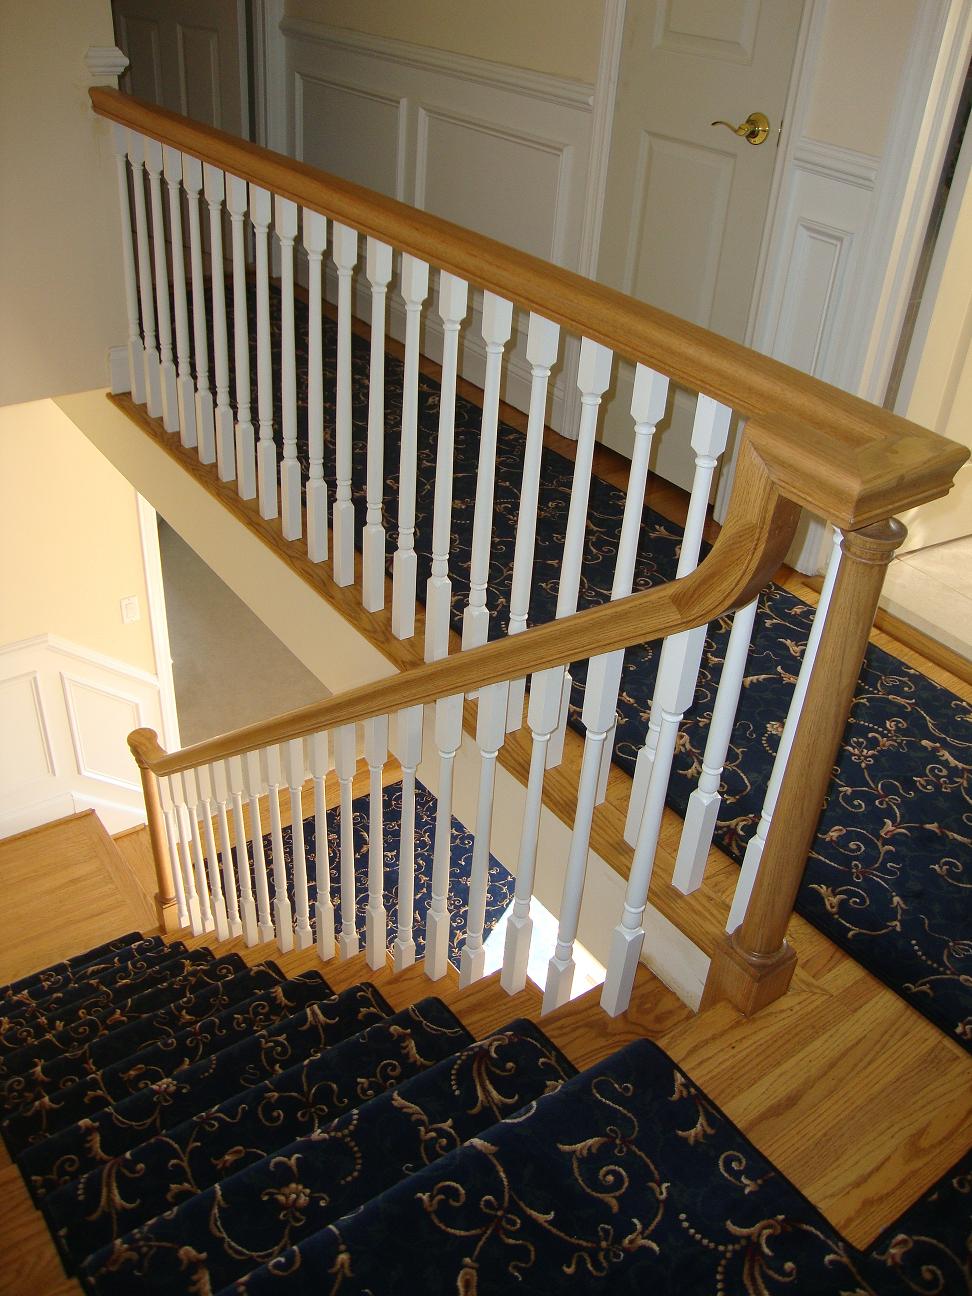 Wood Stairs and Rails and Iron Balusters: New Handrail ...